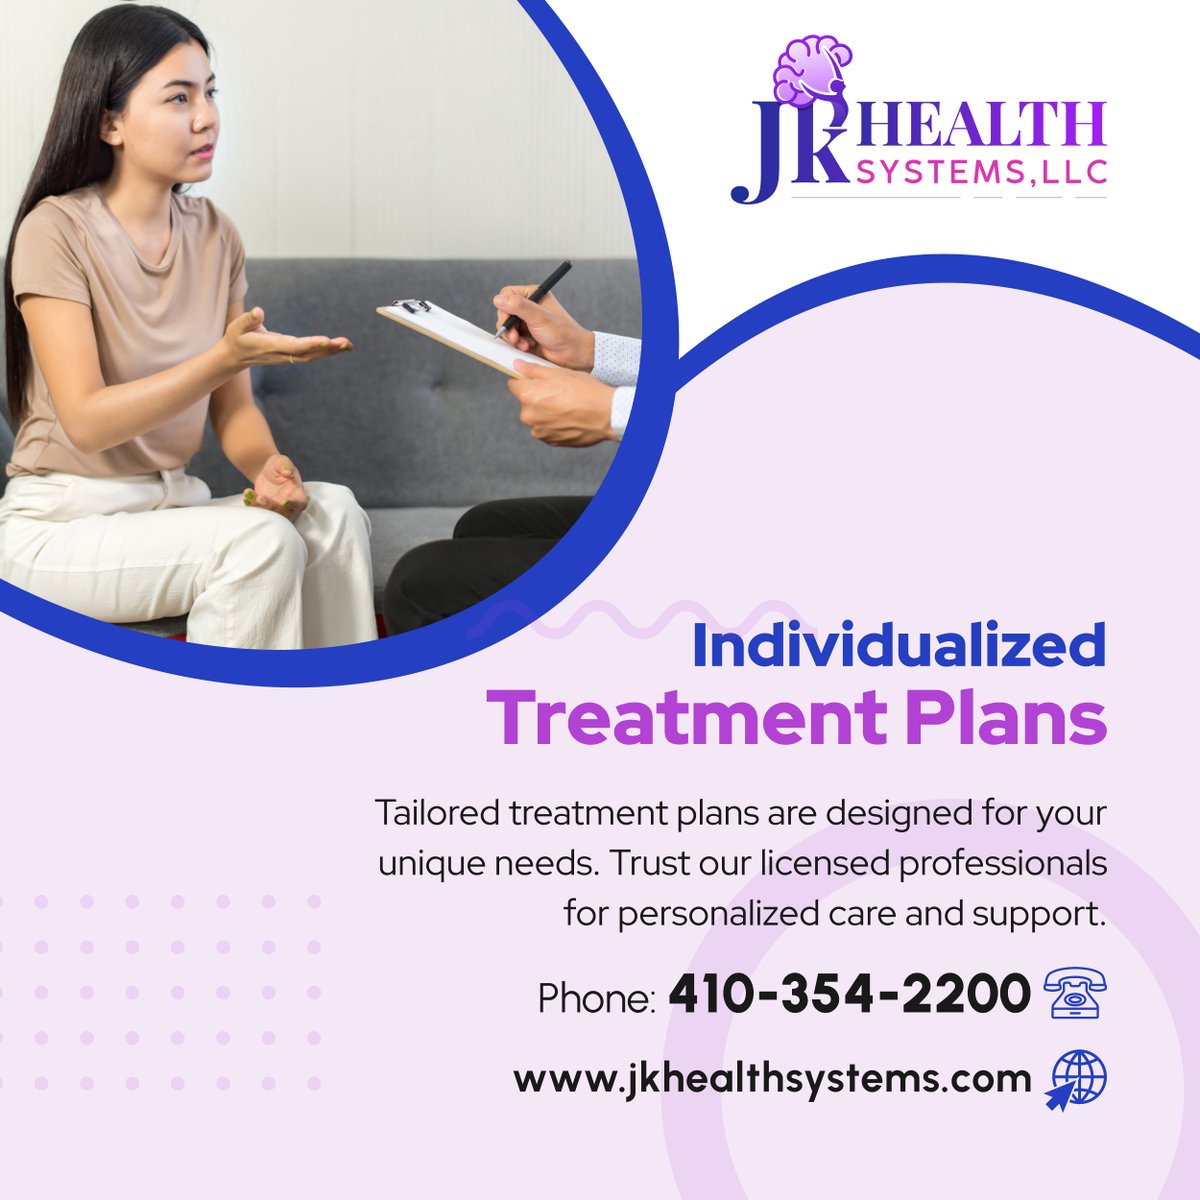 Unlock personalized care through our individualized treatment plans, crafted to meet your distinct needs. Embark on your path to well-being with us today! 

#BaltimoreMD #PersonalizedCare #MentalHealthCare #TreatmentPlans #DistinctNeeds